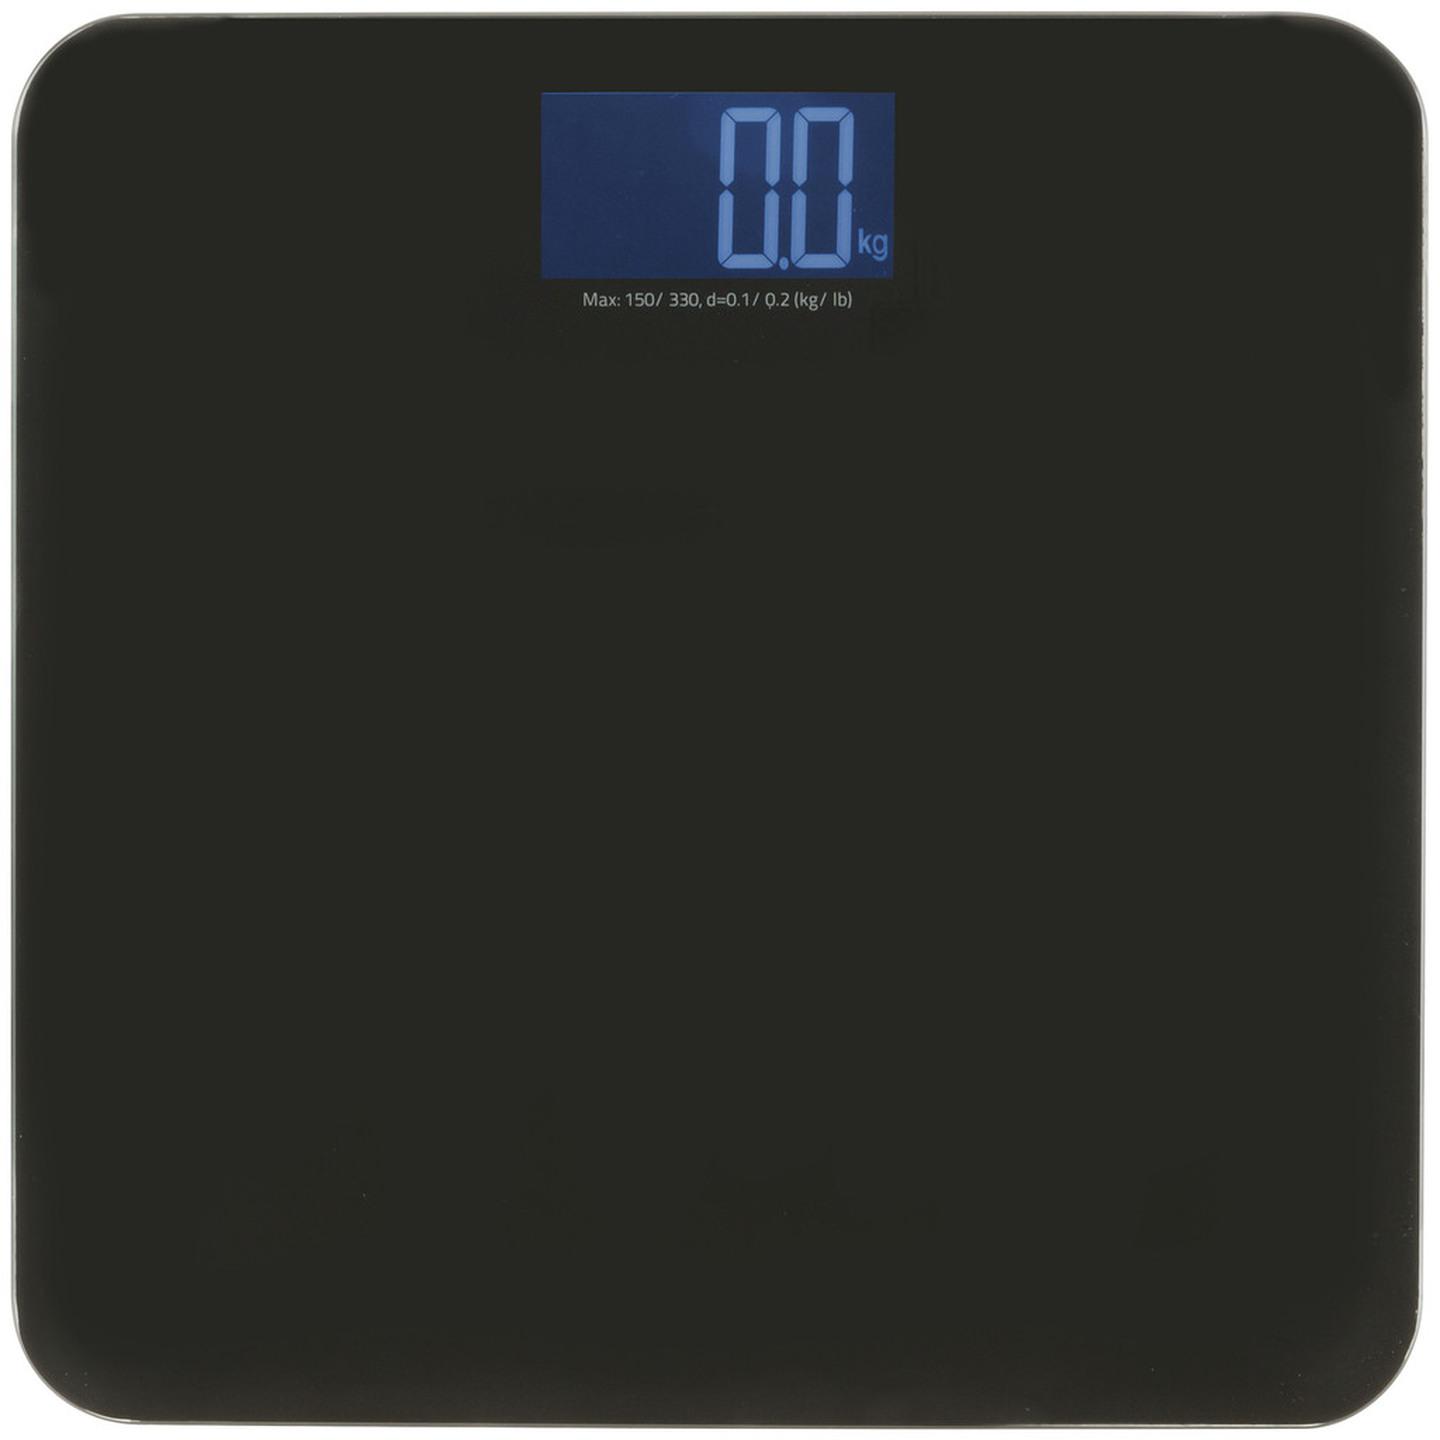 Bathroom Scales with Bluetooth Communication